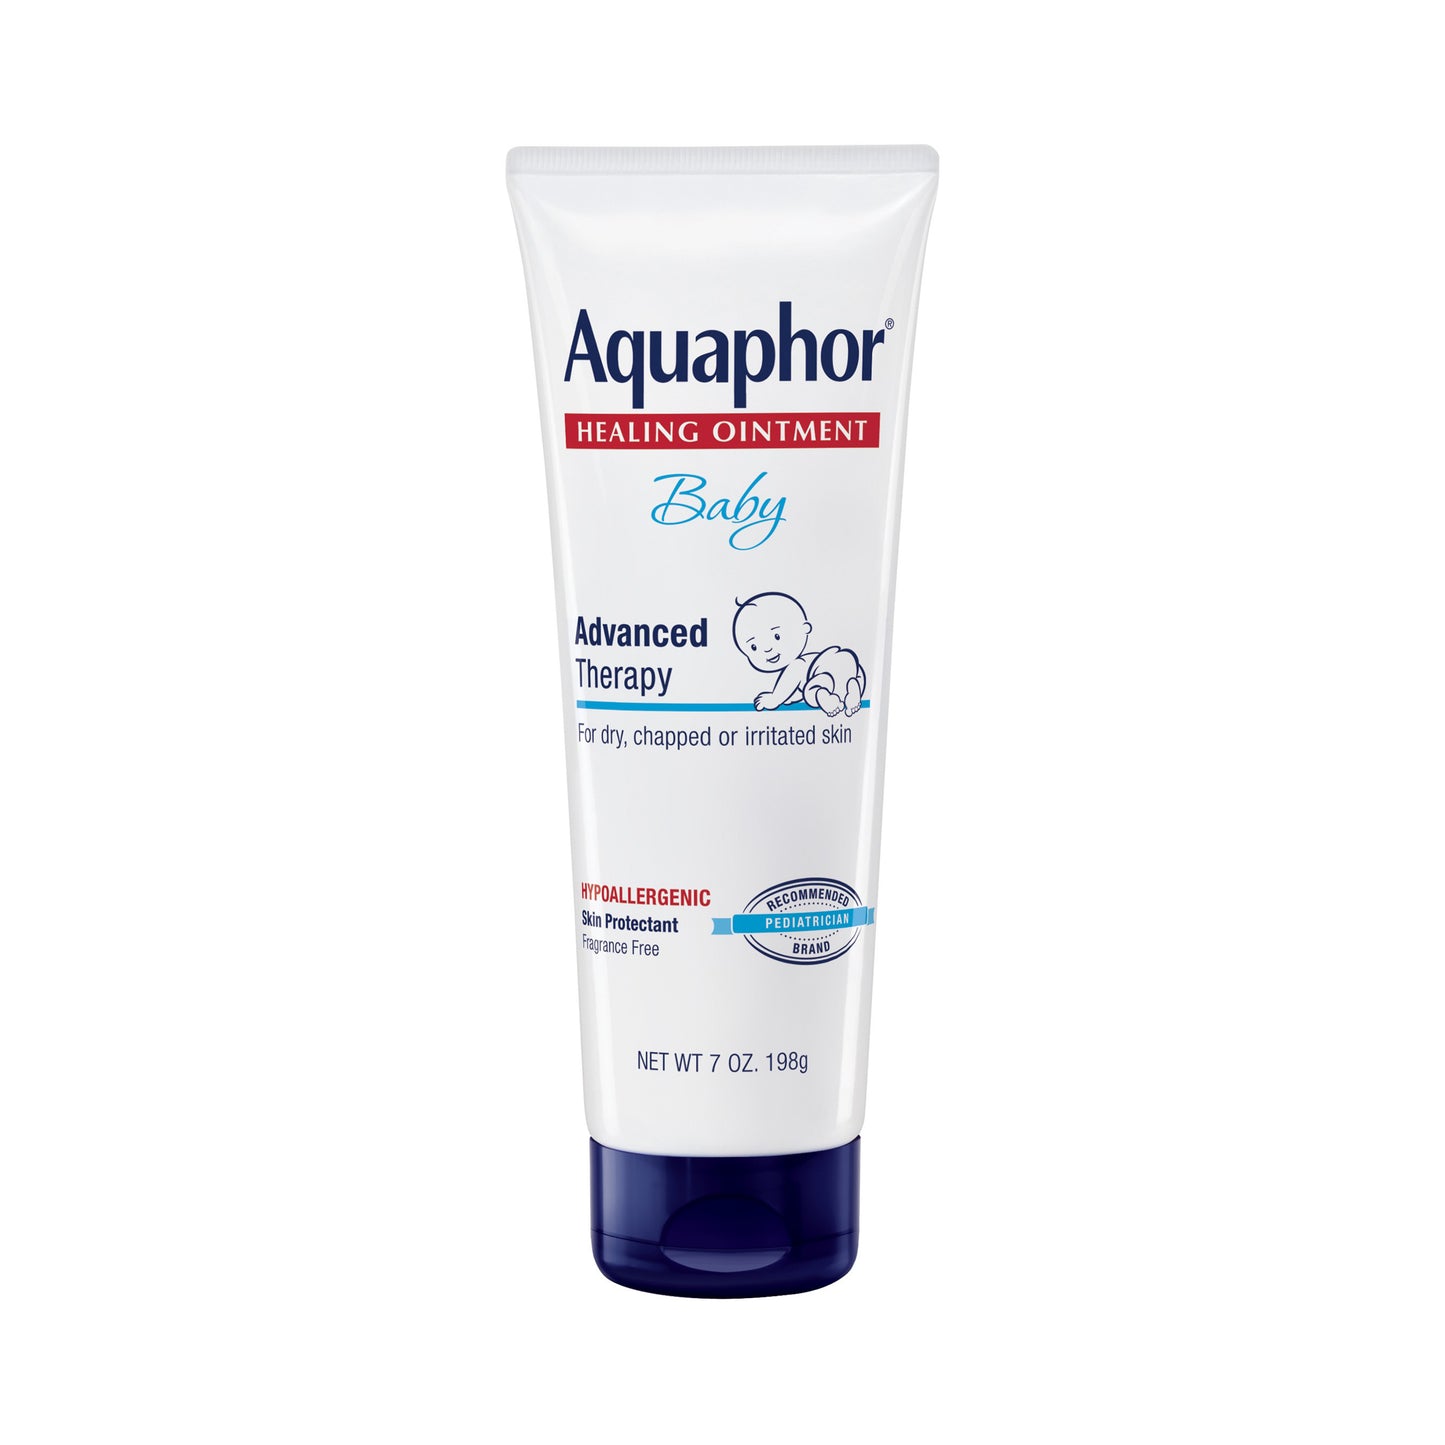 Aquaphor Advanced Therapy Baby Healing Ointment 198 g